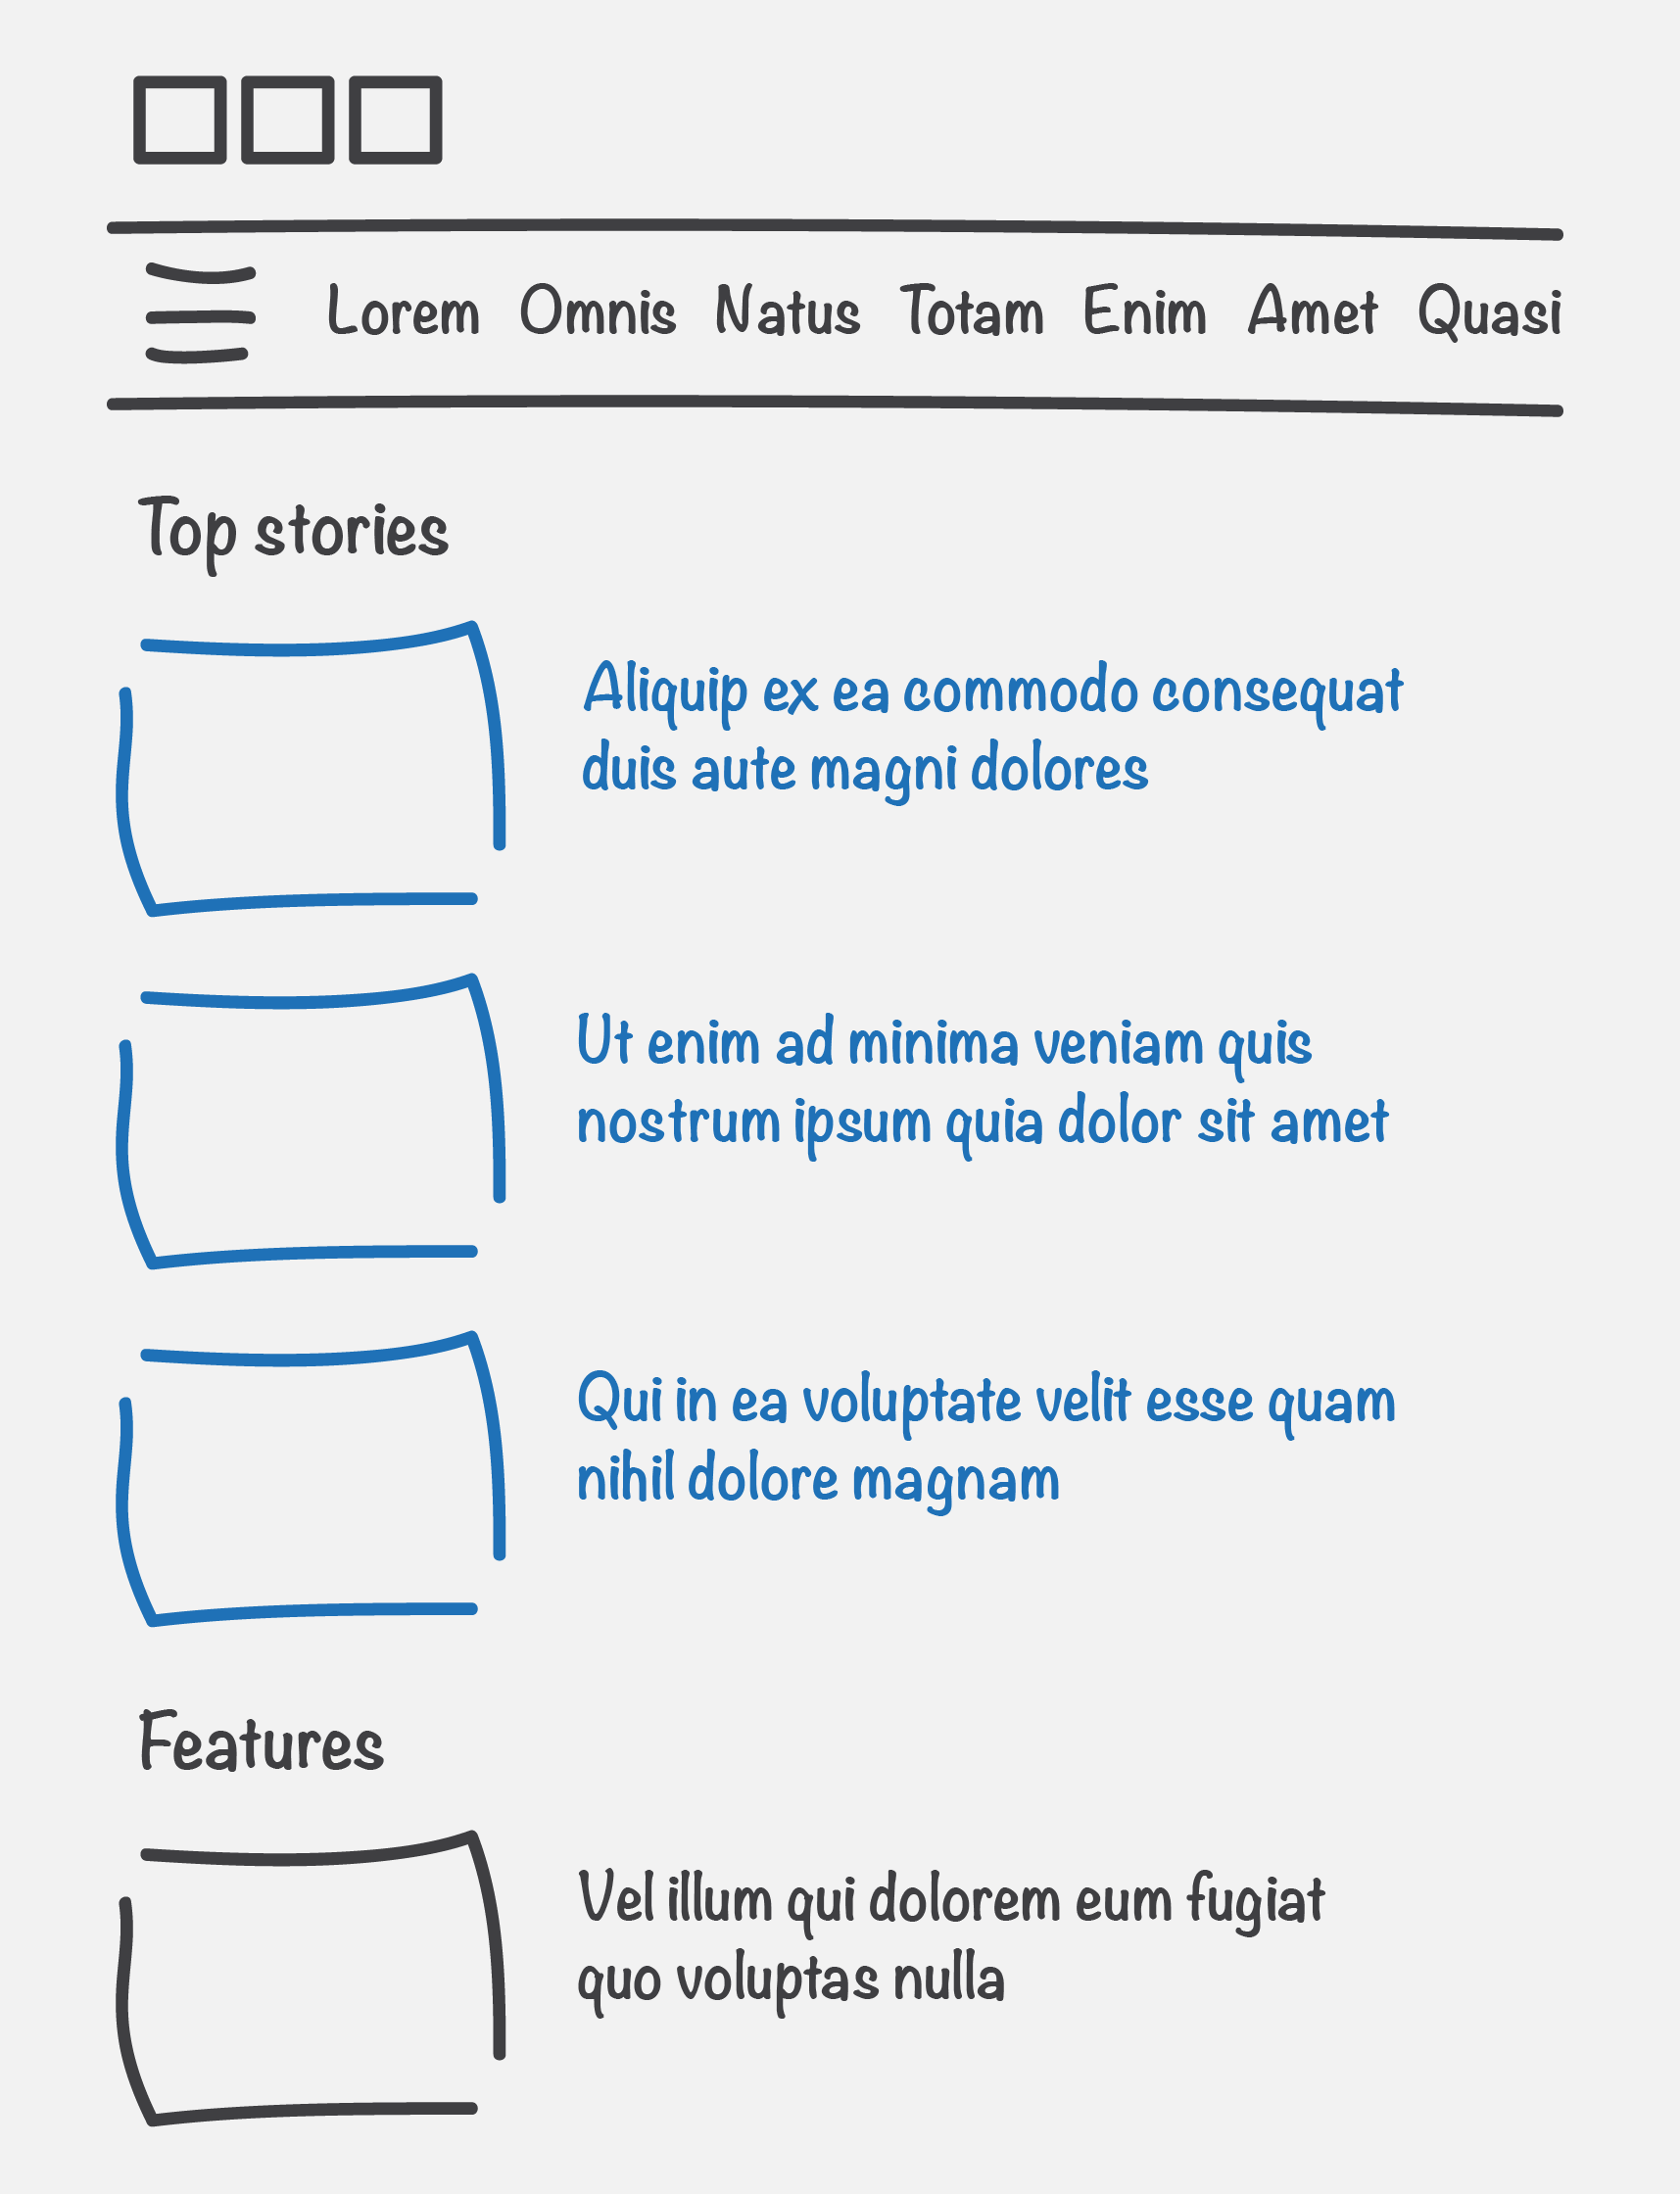 Top stories component highlighting stories that cannot be read